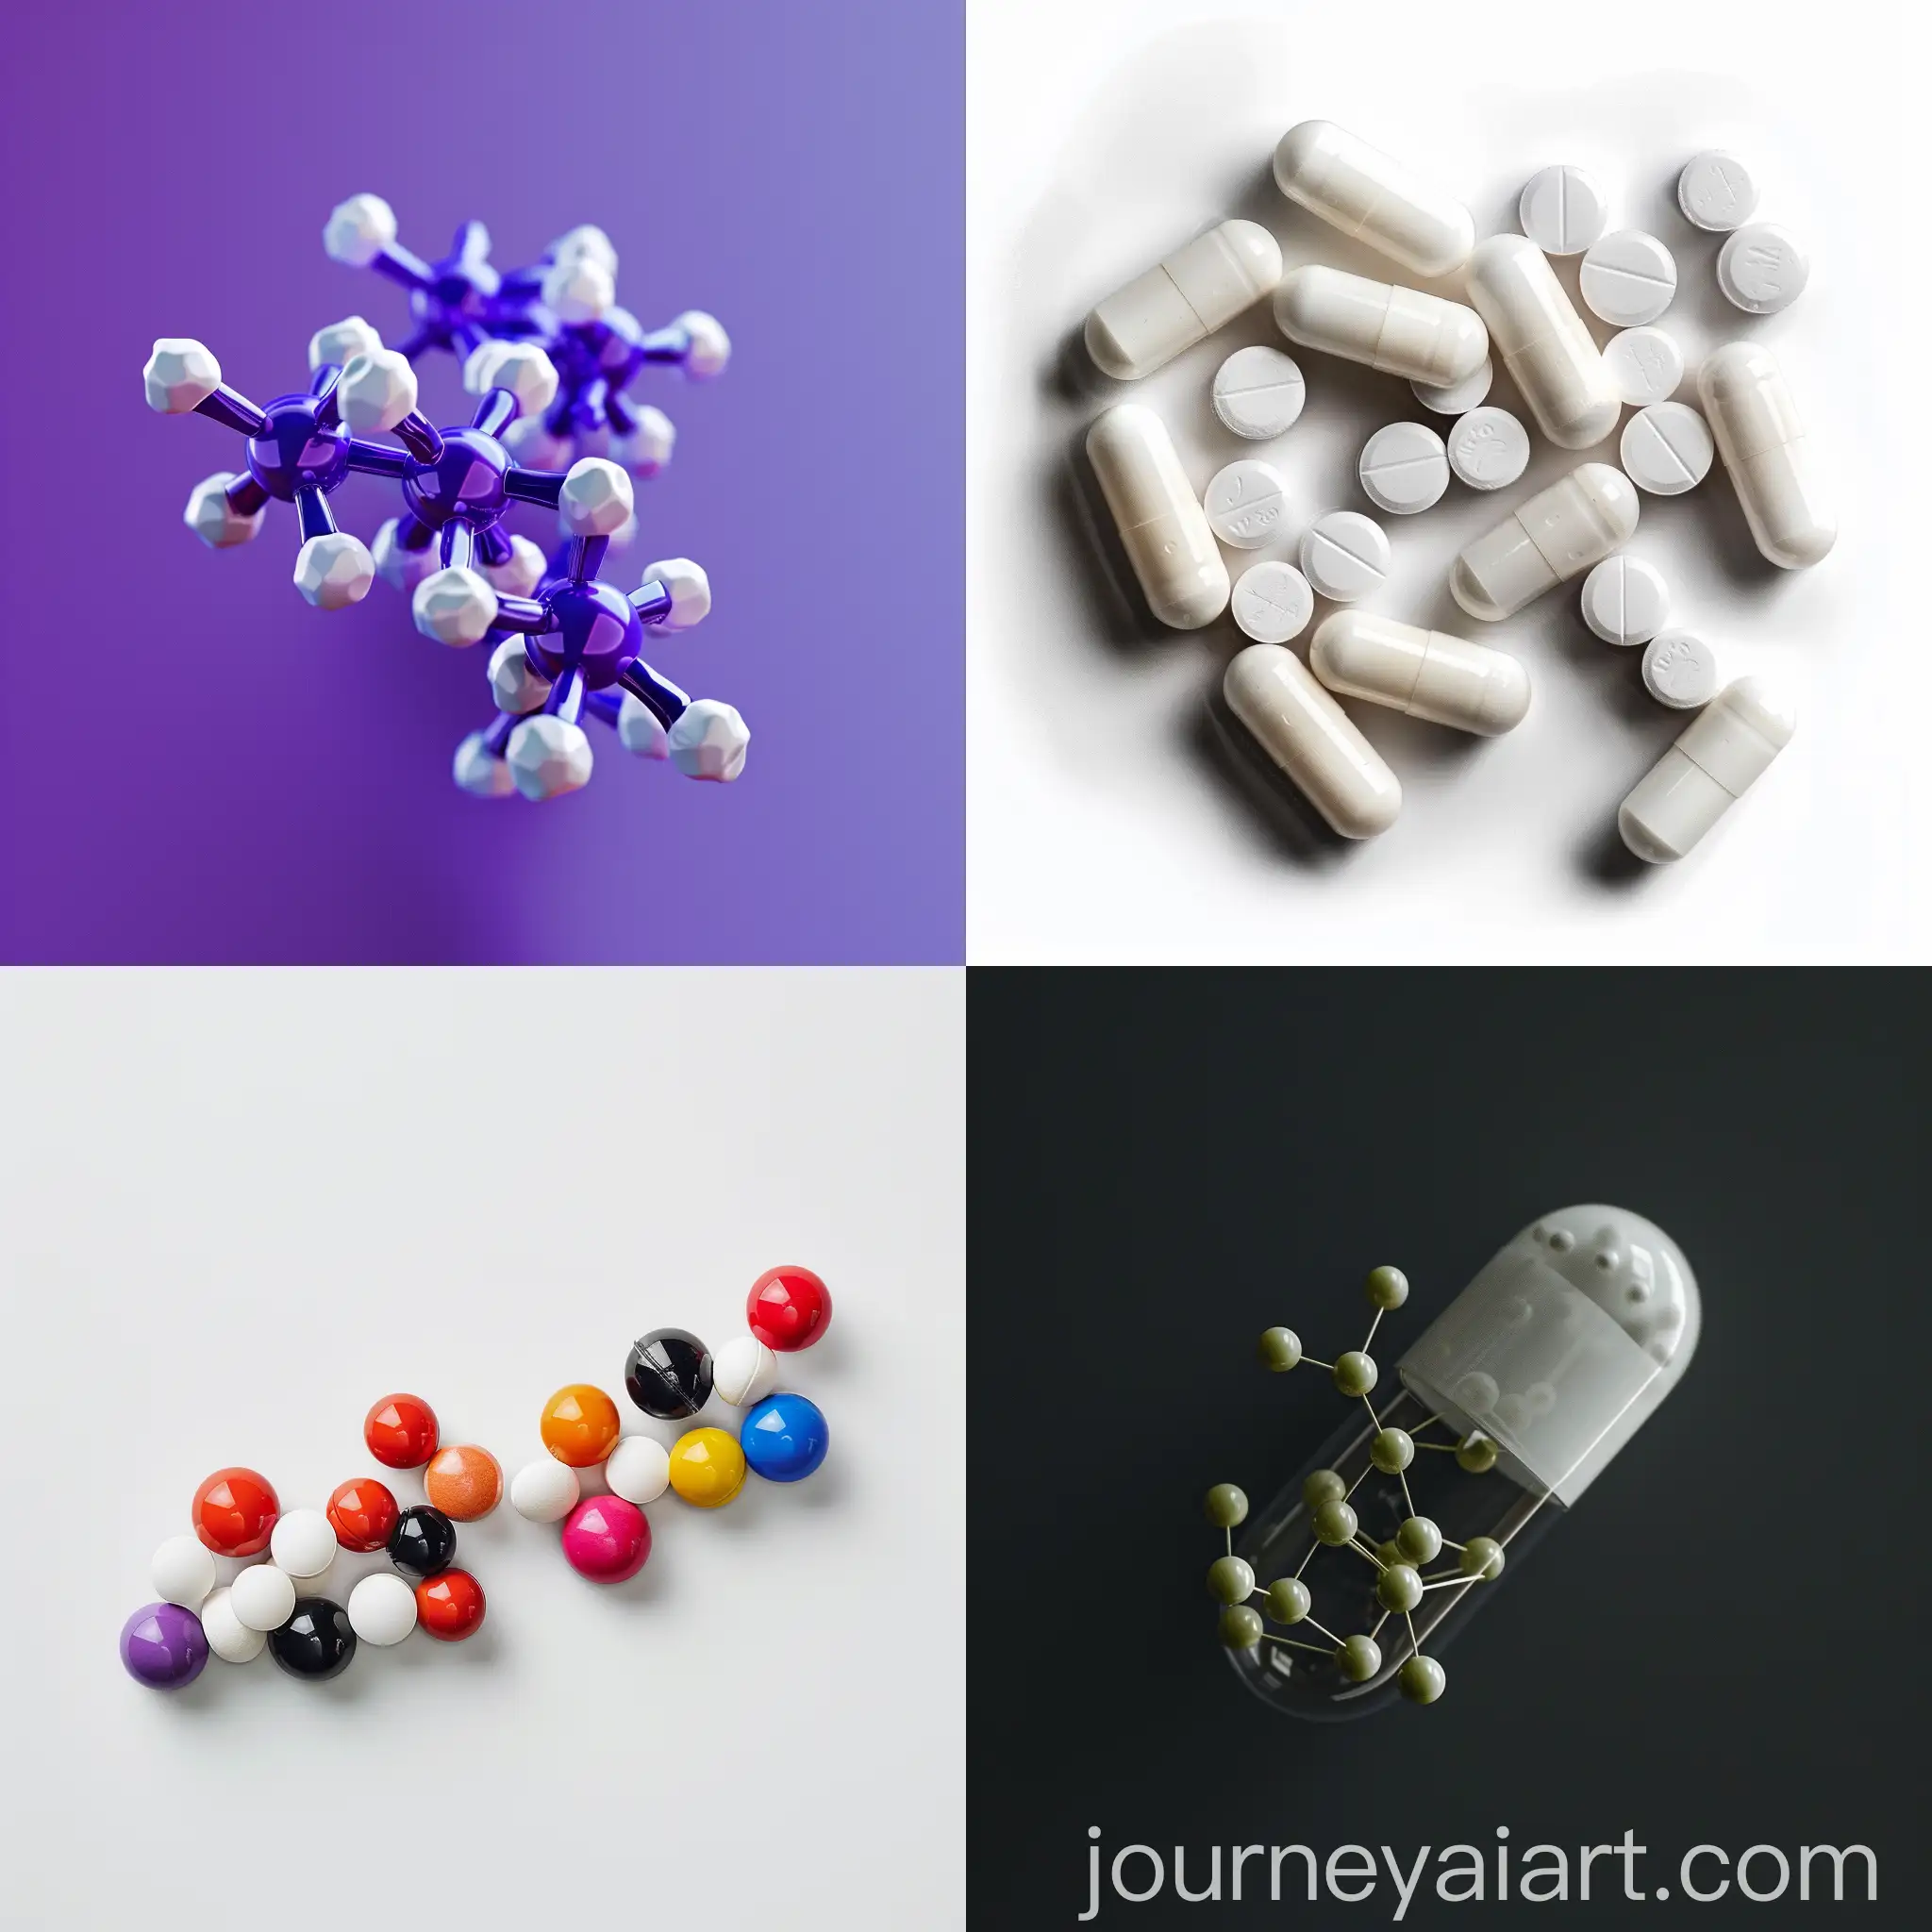 HighQuality-Modafinil-Molecule-Pill-Structure-for-Magazine-Article